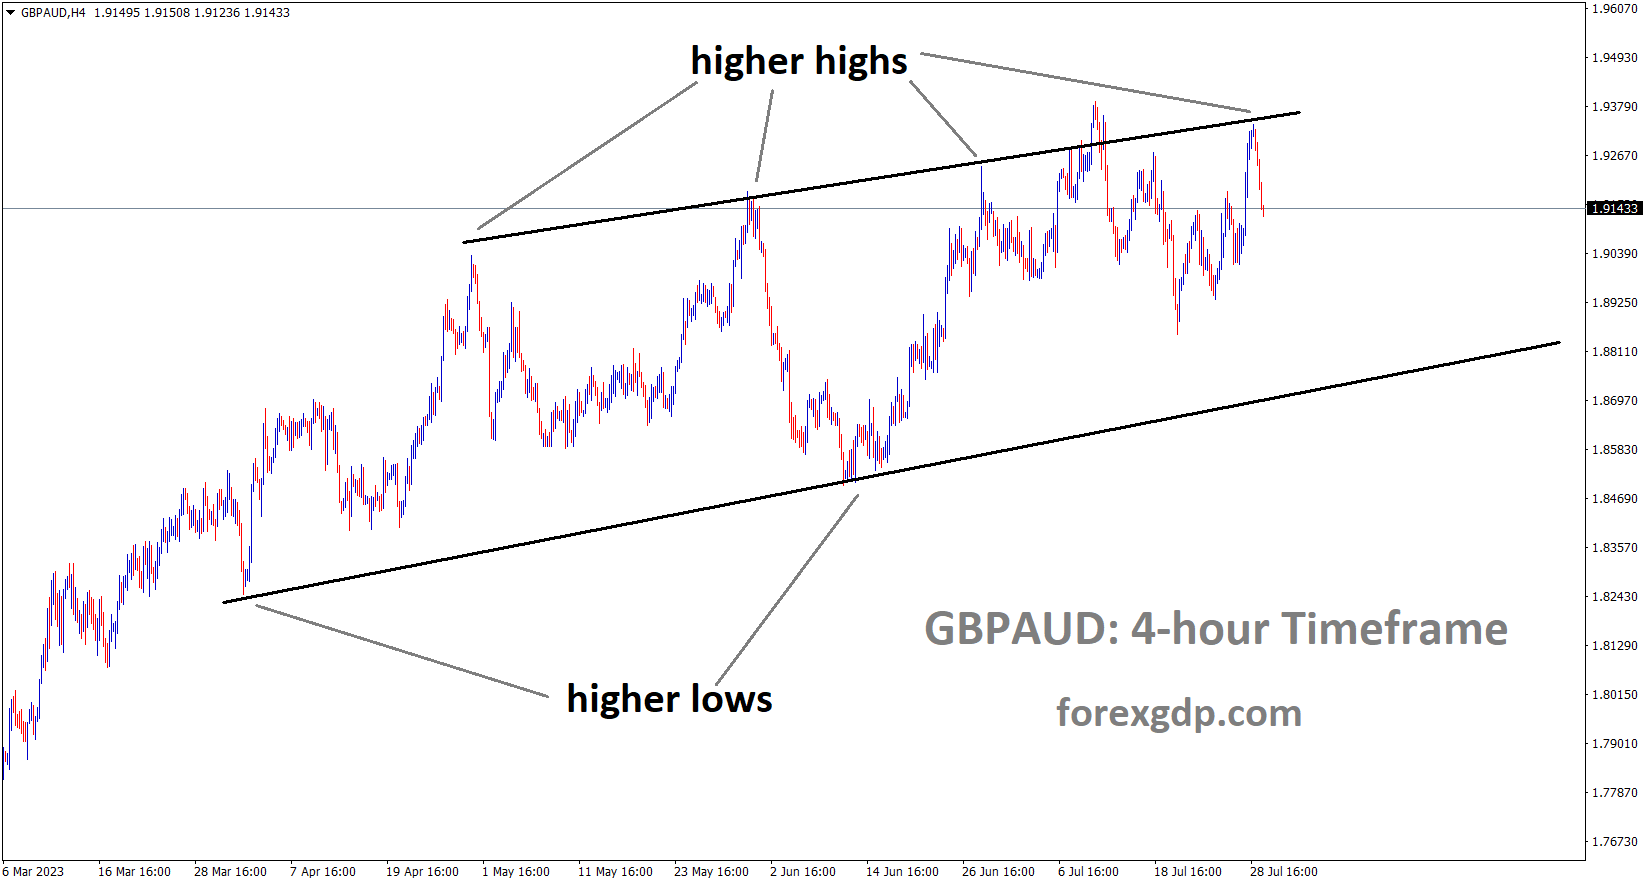 GBPAUD H4 TF analysis Market is moving in an Ascending channel and the market has fallen from the higher high area of the channel